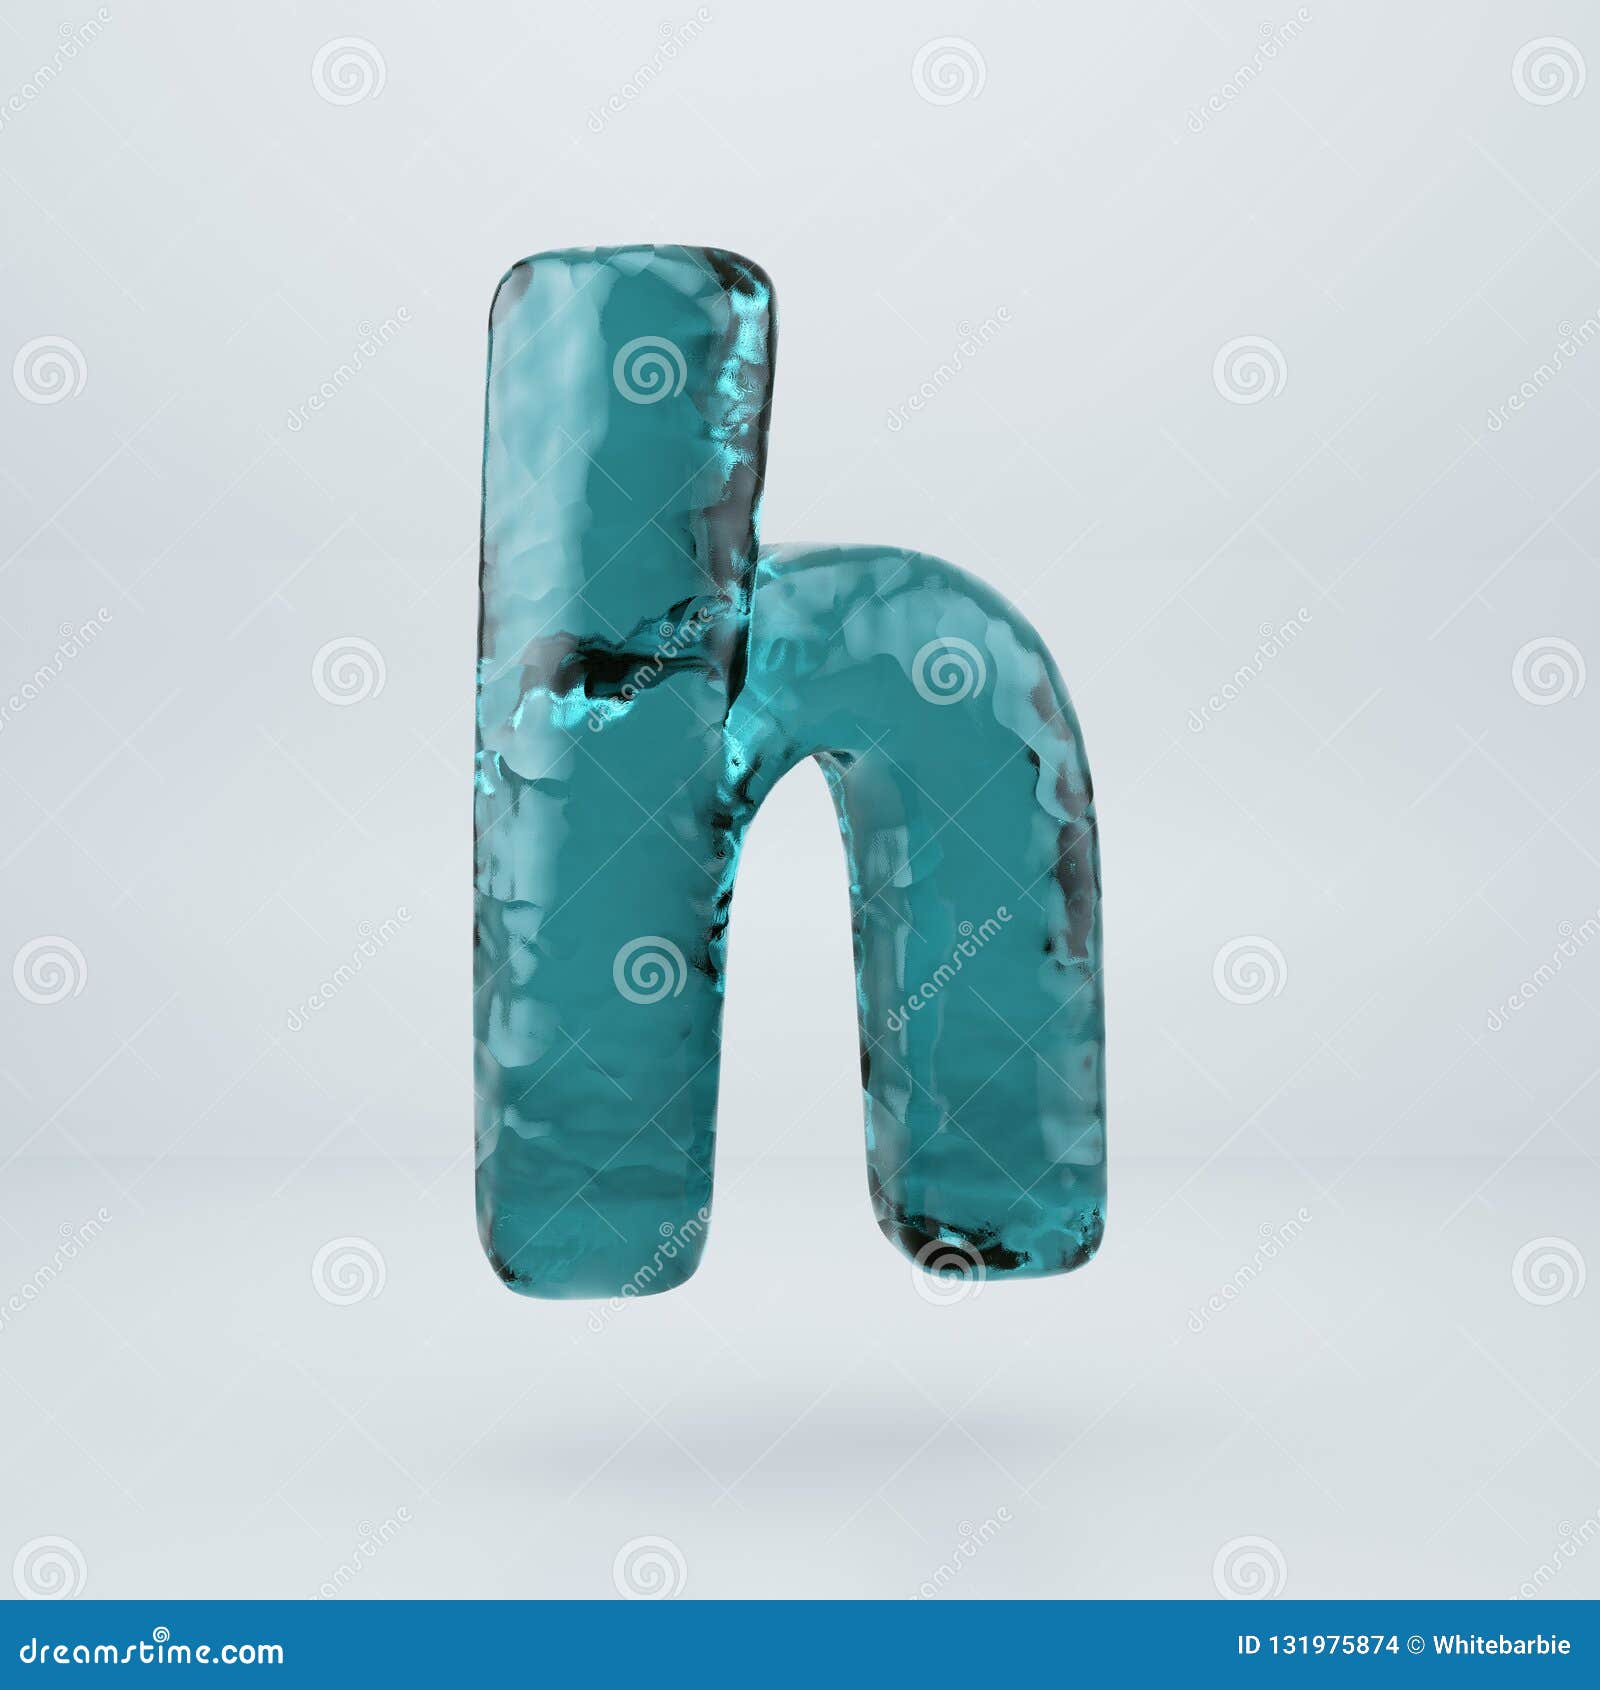 Ocean Water Letter H Lowercase Isolated On White Background Stock ...